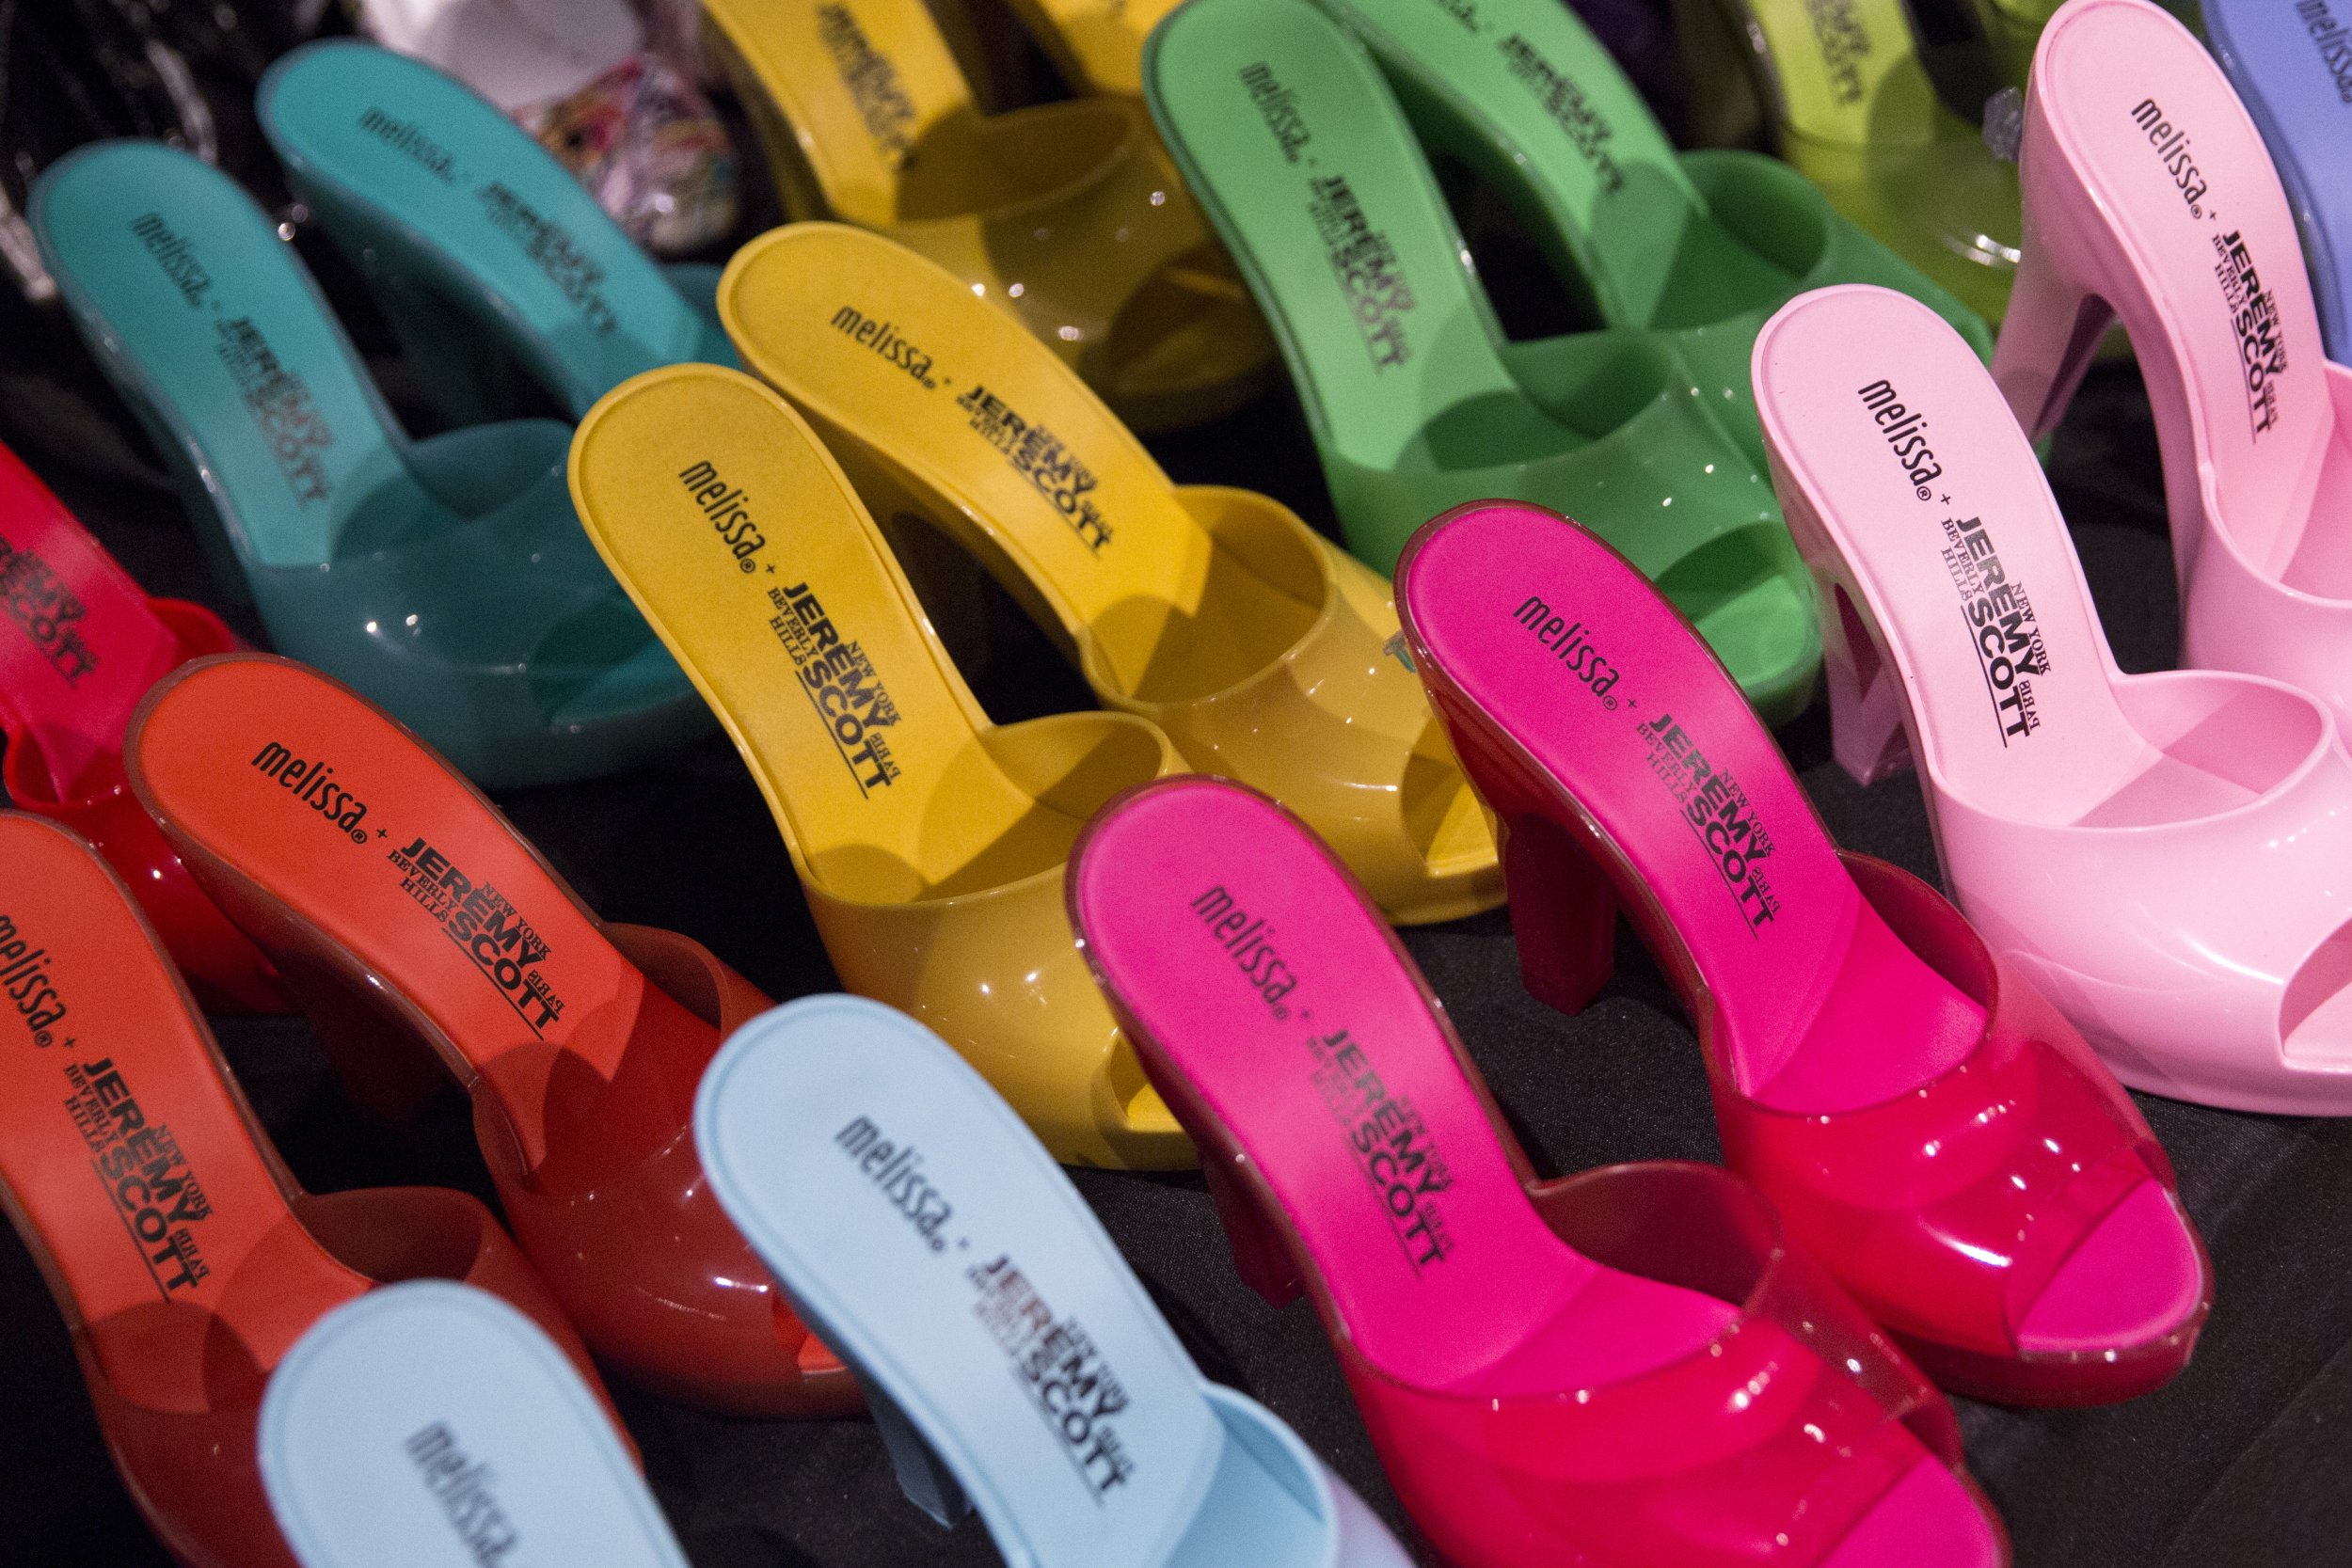 1202 Shoes are lined up backstage before the Jeremy Scott SpringSummer 2016 collection 